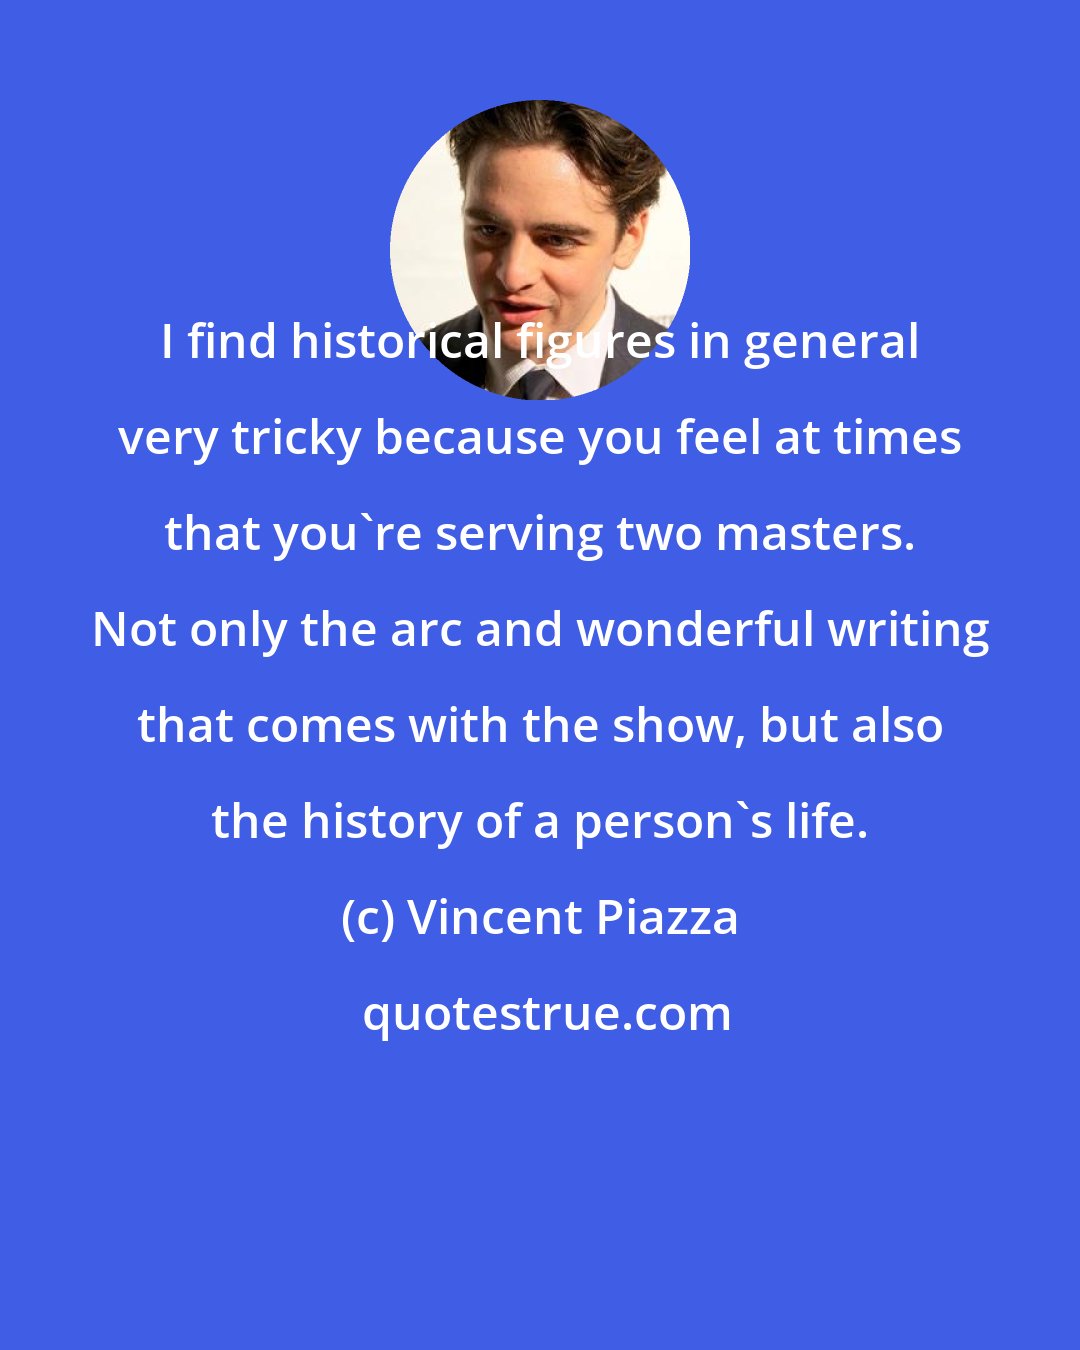 Vincent Piazza: I find historical figures in general very tricky because you feel at times that you're serving two masters. Not only the arc and wonderful writing that comes with the show, but also the history of a person's life.